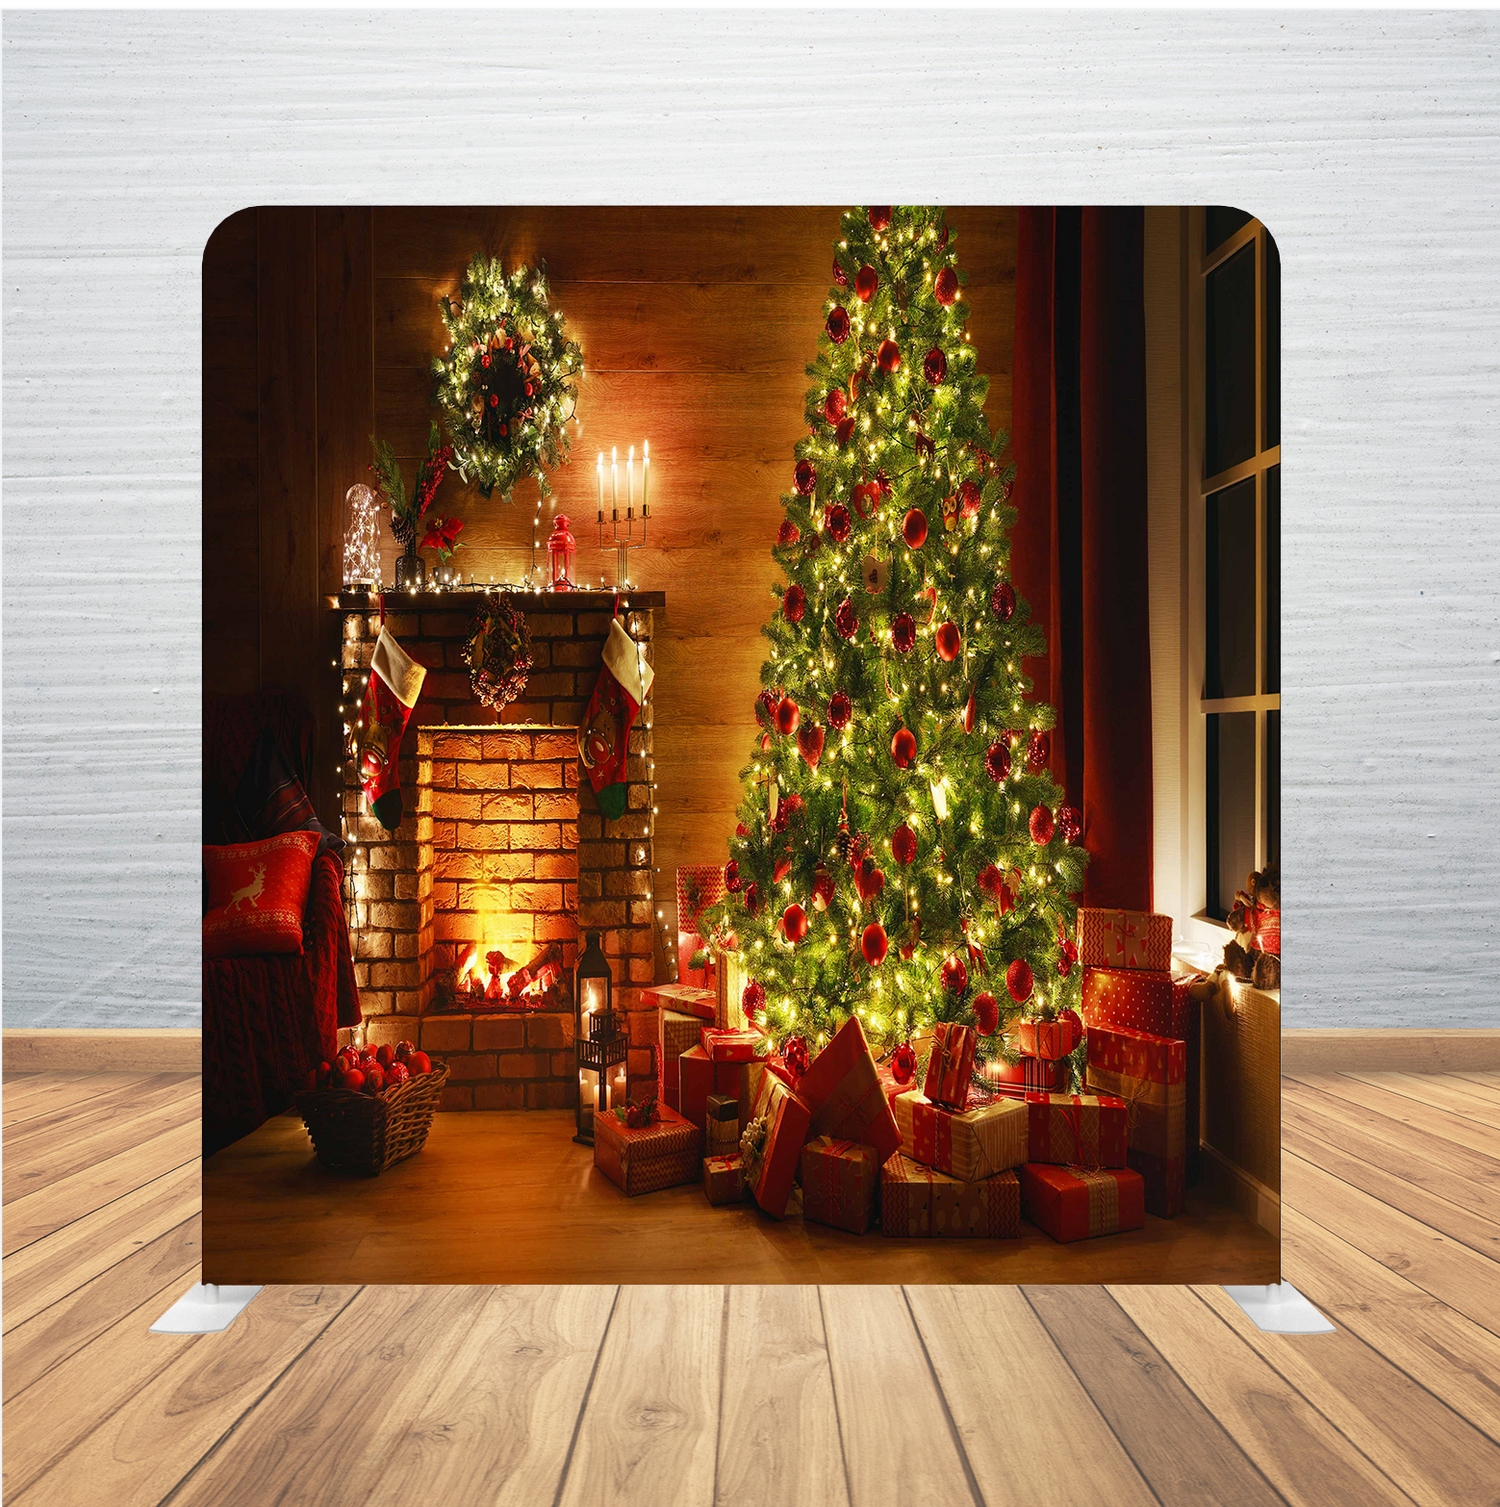 8X8 Pillowcase Tension Backdrop- Christmas Tree with Fireplace